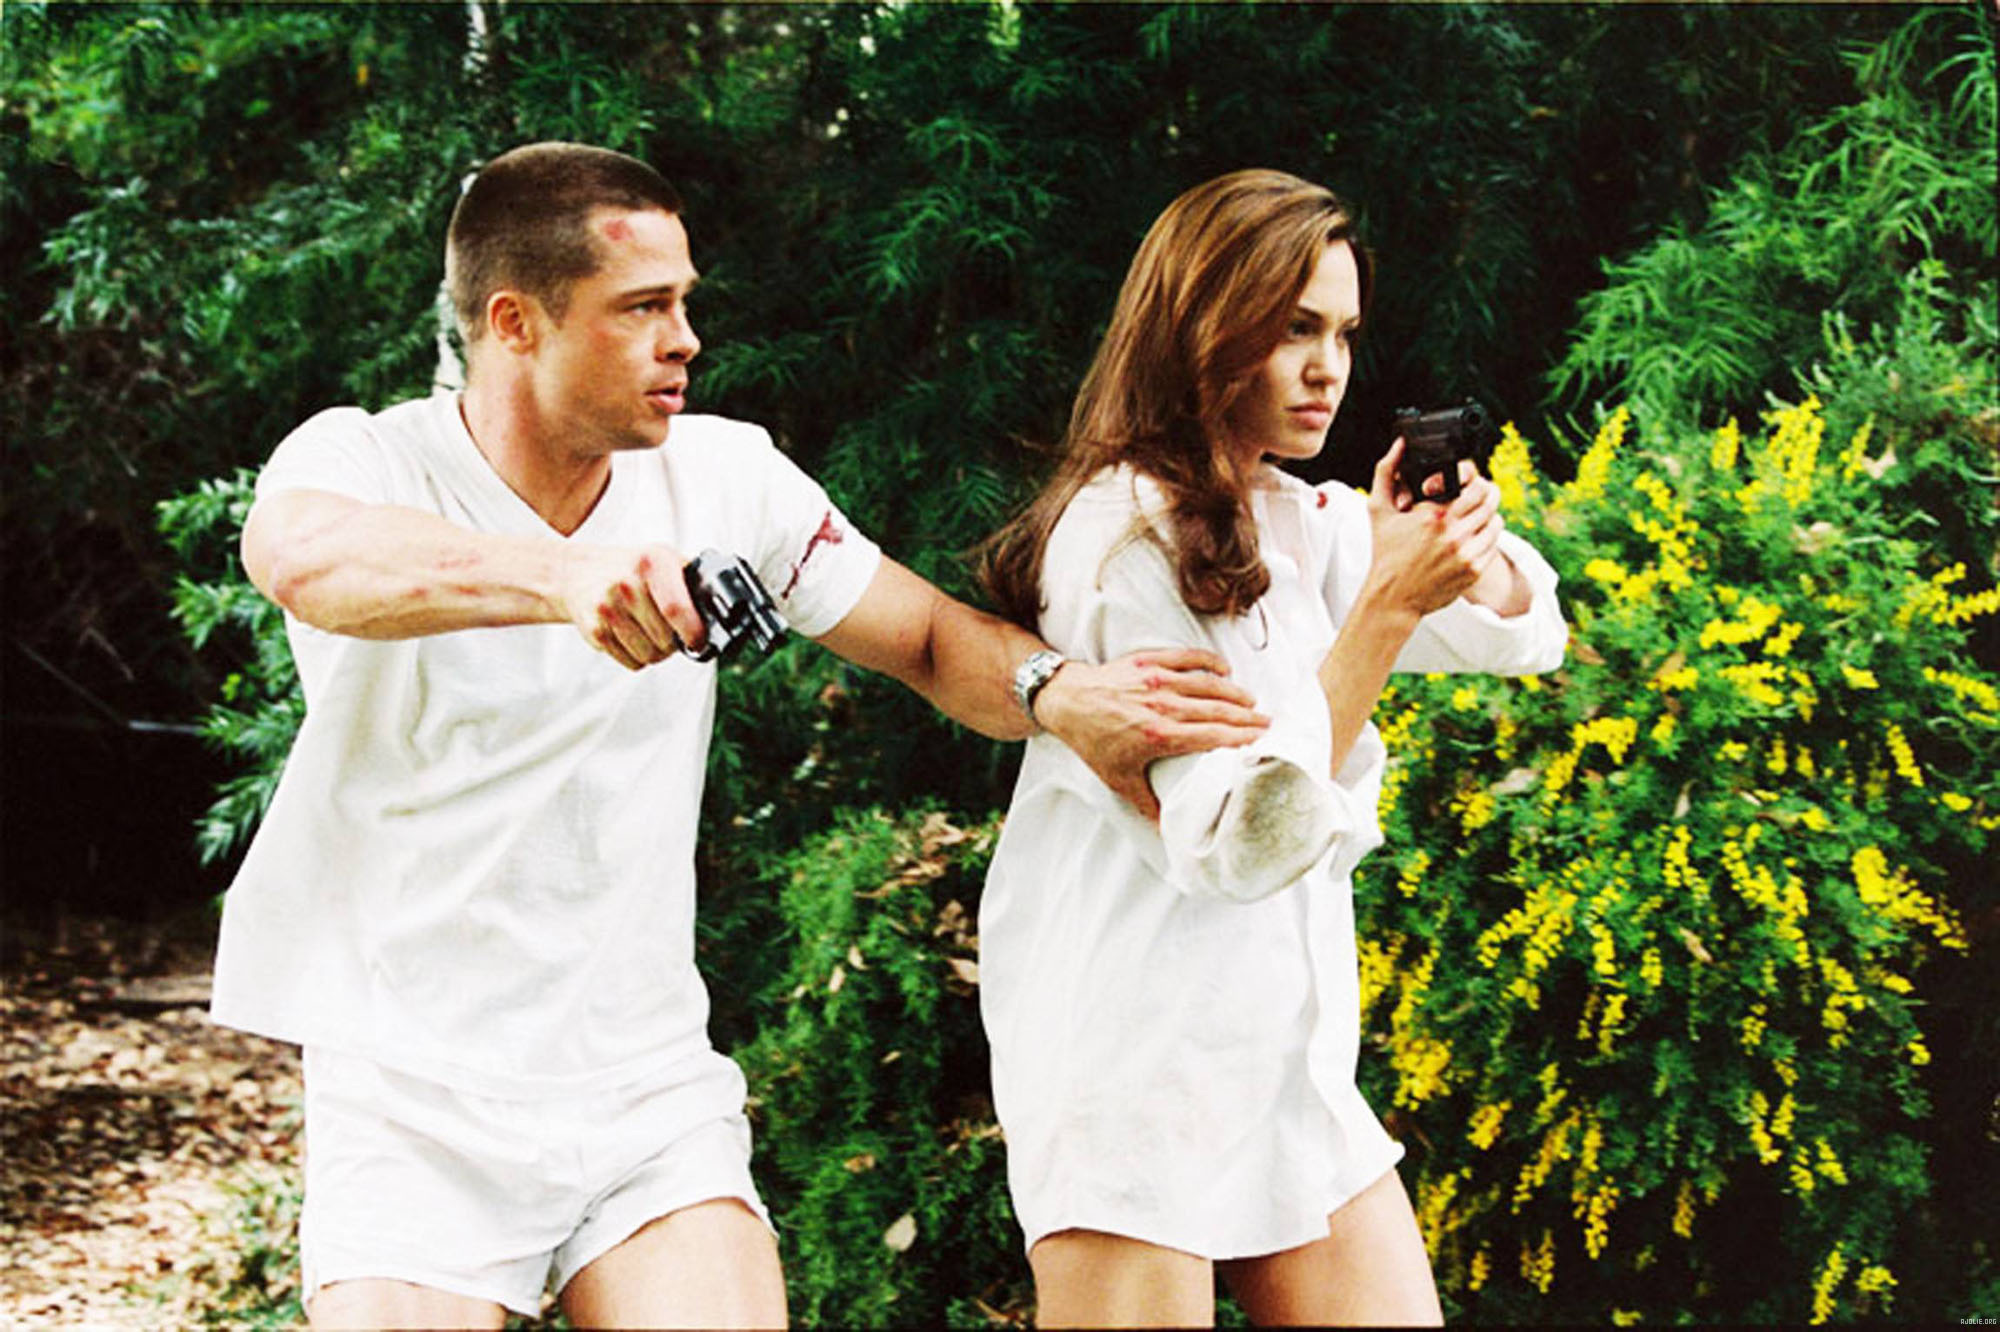 mr and mrs smith, Romantic, Comedy, Action, Mrs, Smith, Angelina, Jolie